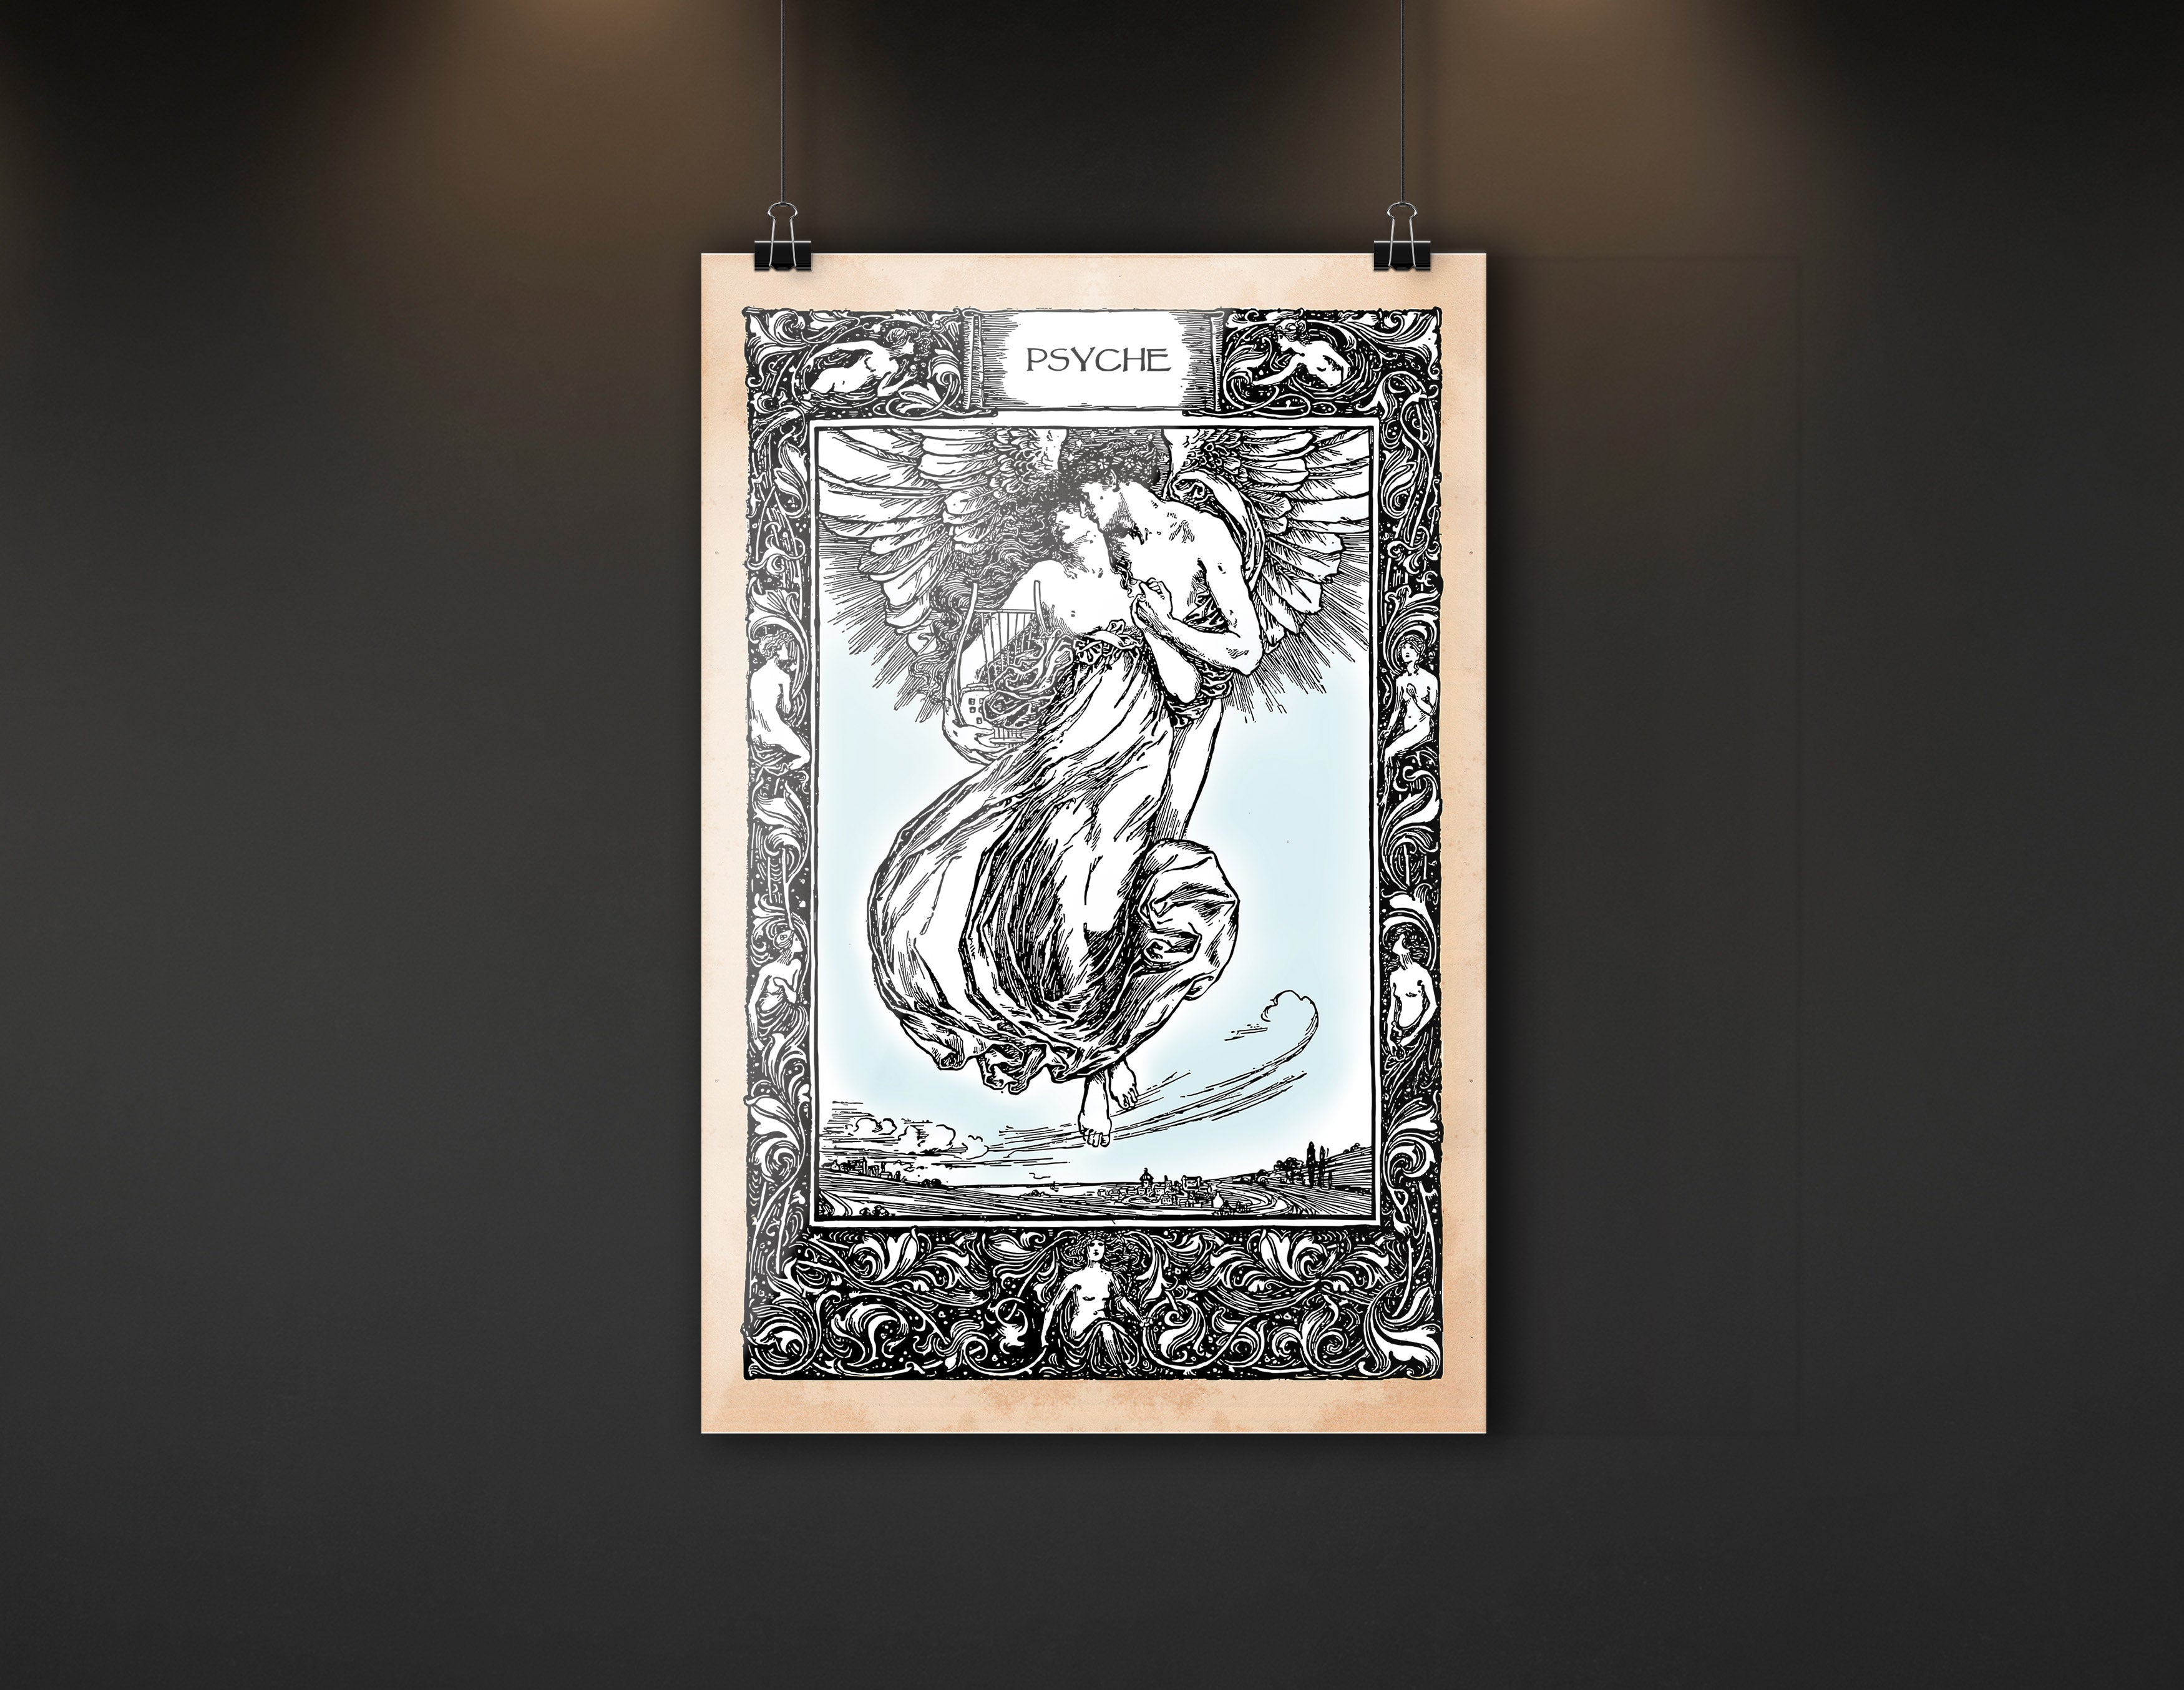 Cupid and Psyche Poster, Professionally Printed on Ethically Sourced, Premium Paper, Available in Two Sizes